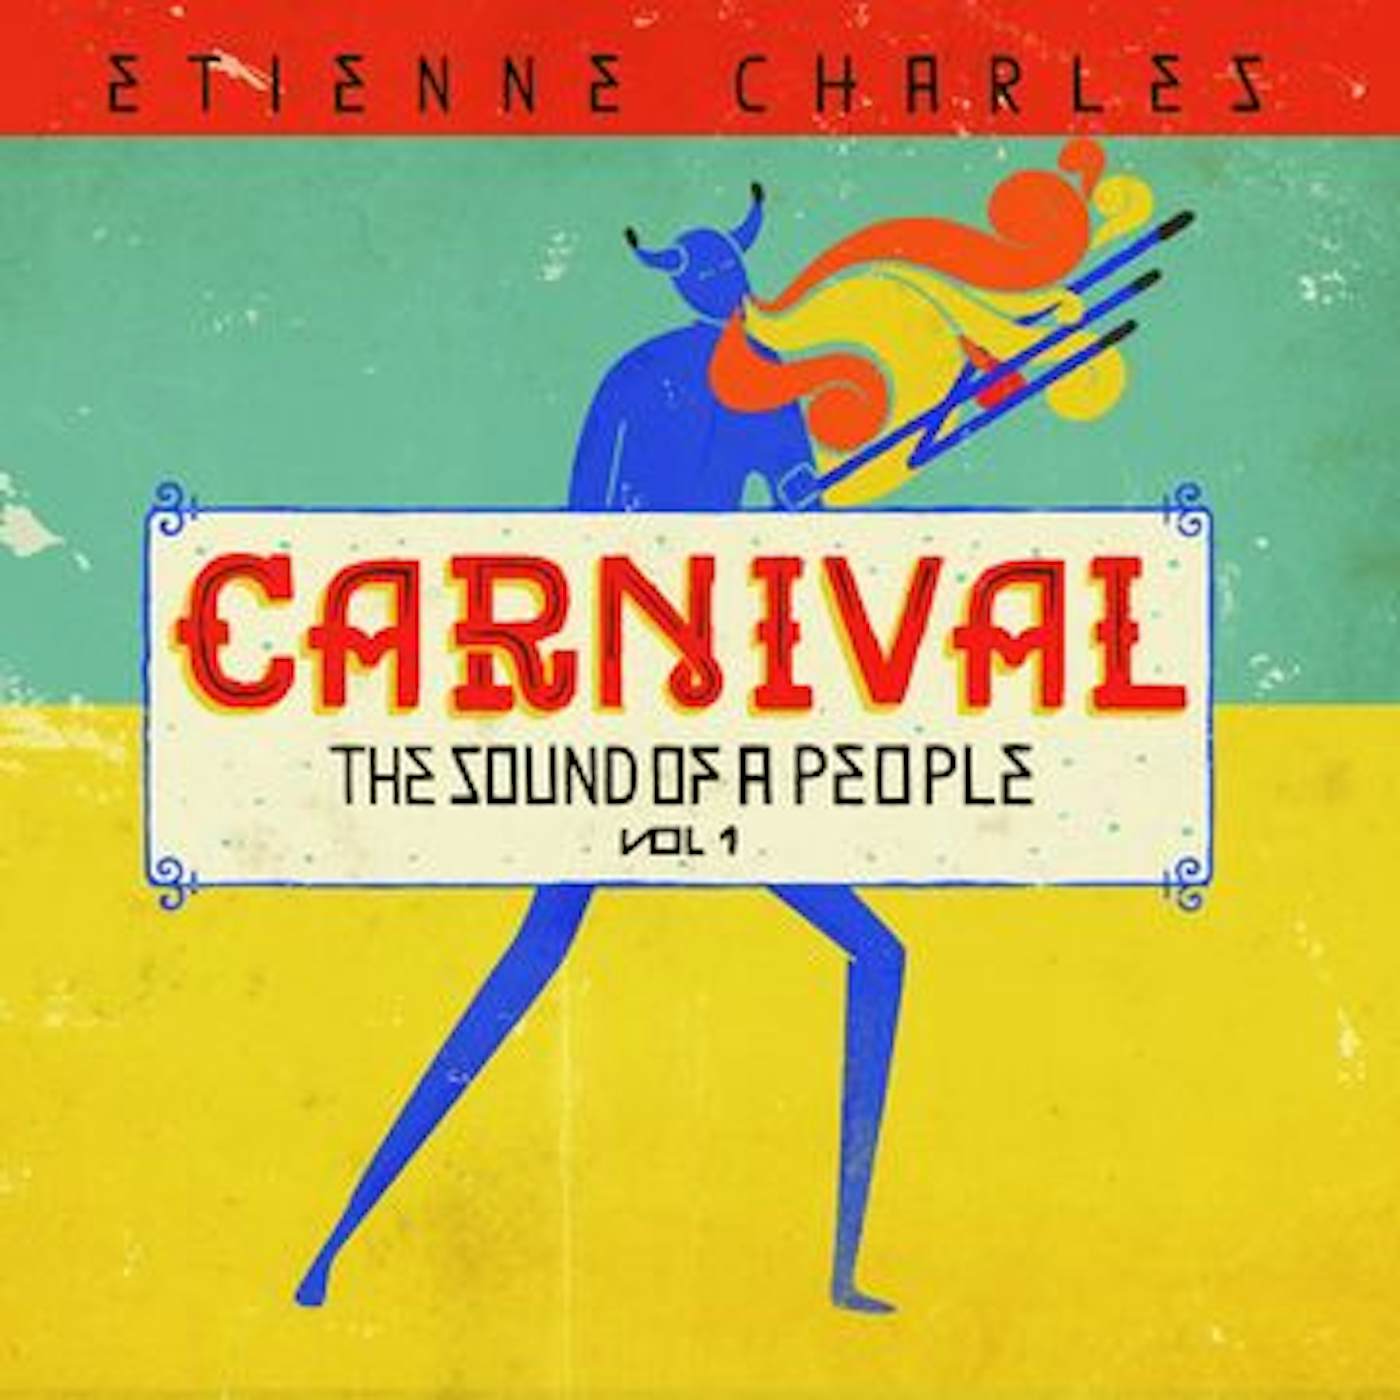 Etienne Charles CARNIVAL: THE SOUND OF A PEOPLE 1 CD